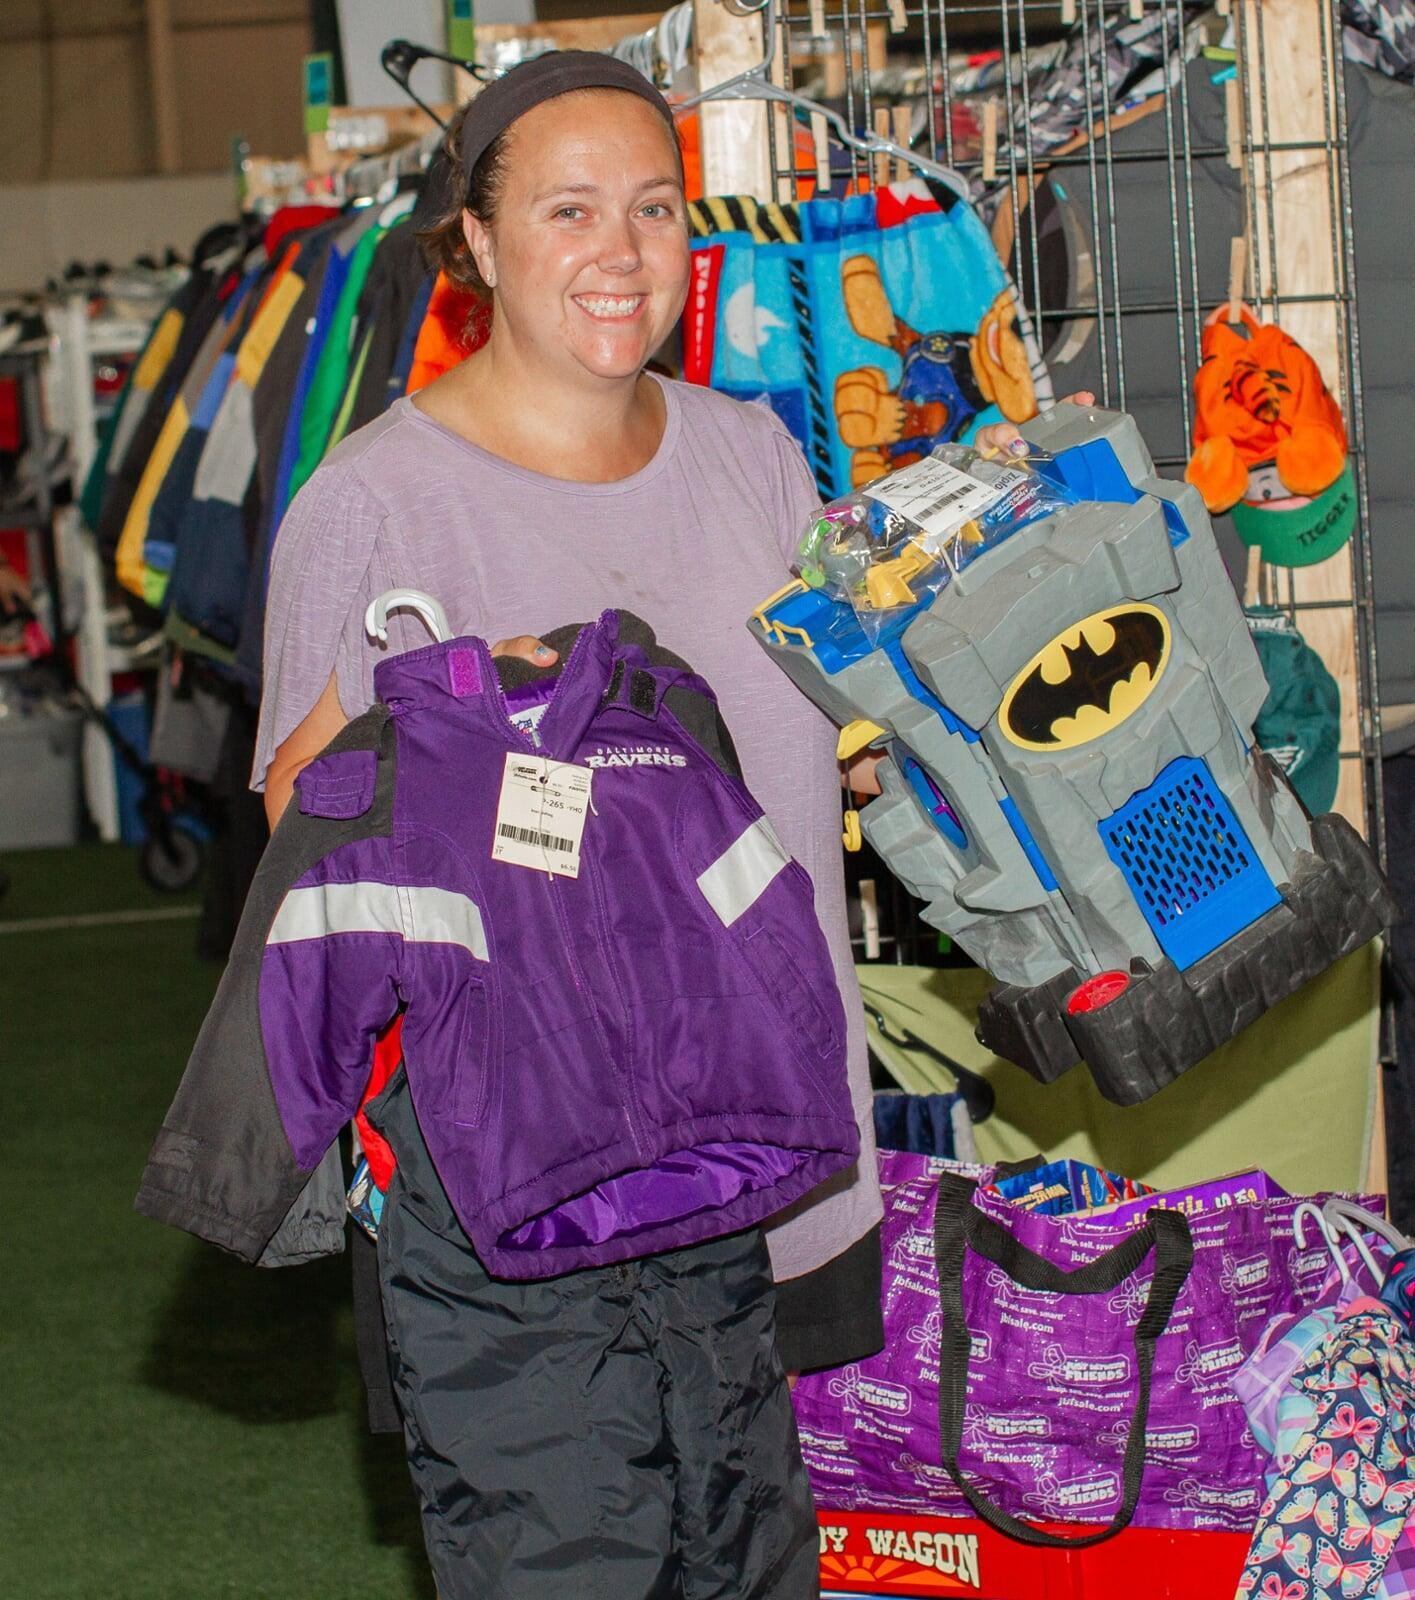 Smiling woman holding up a batman toy and a purple and black jacket